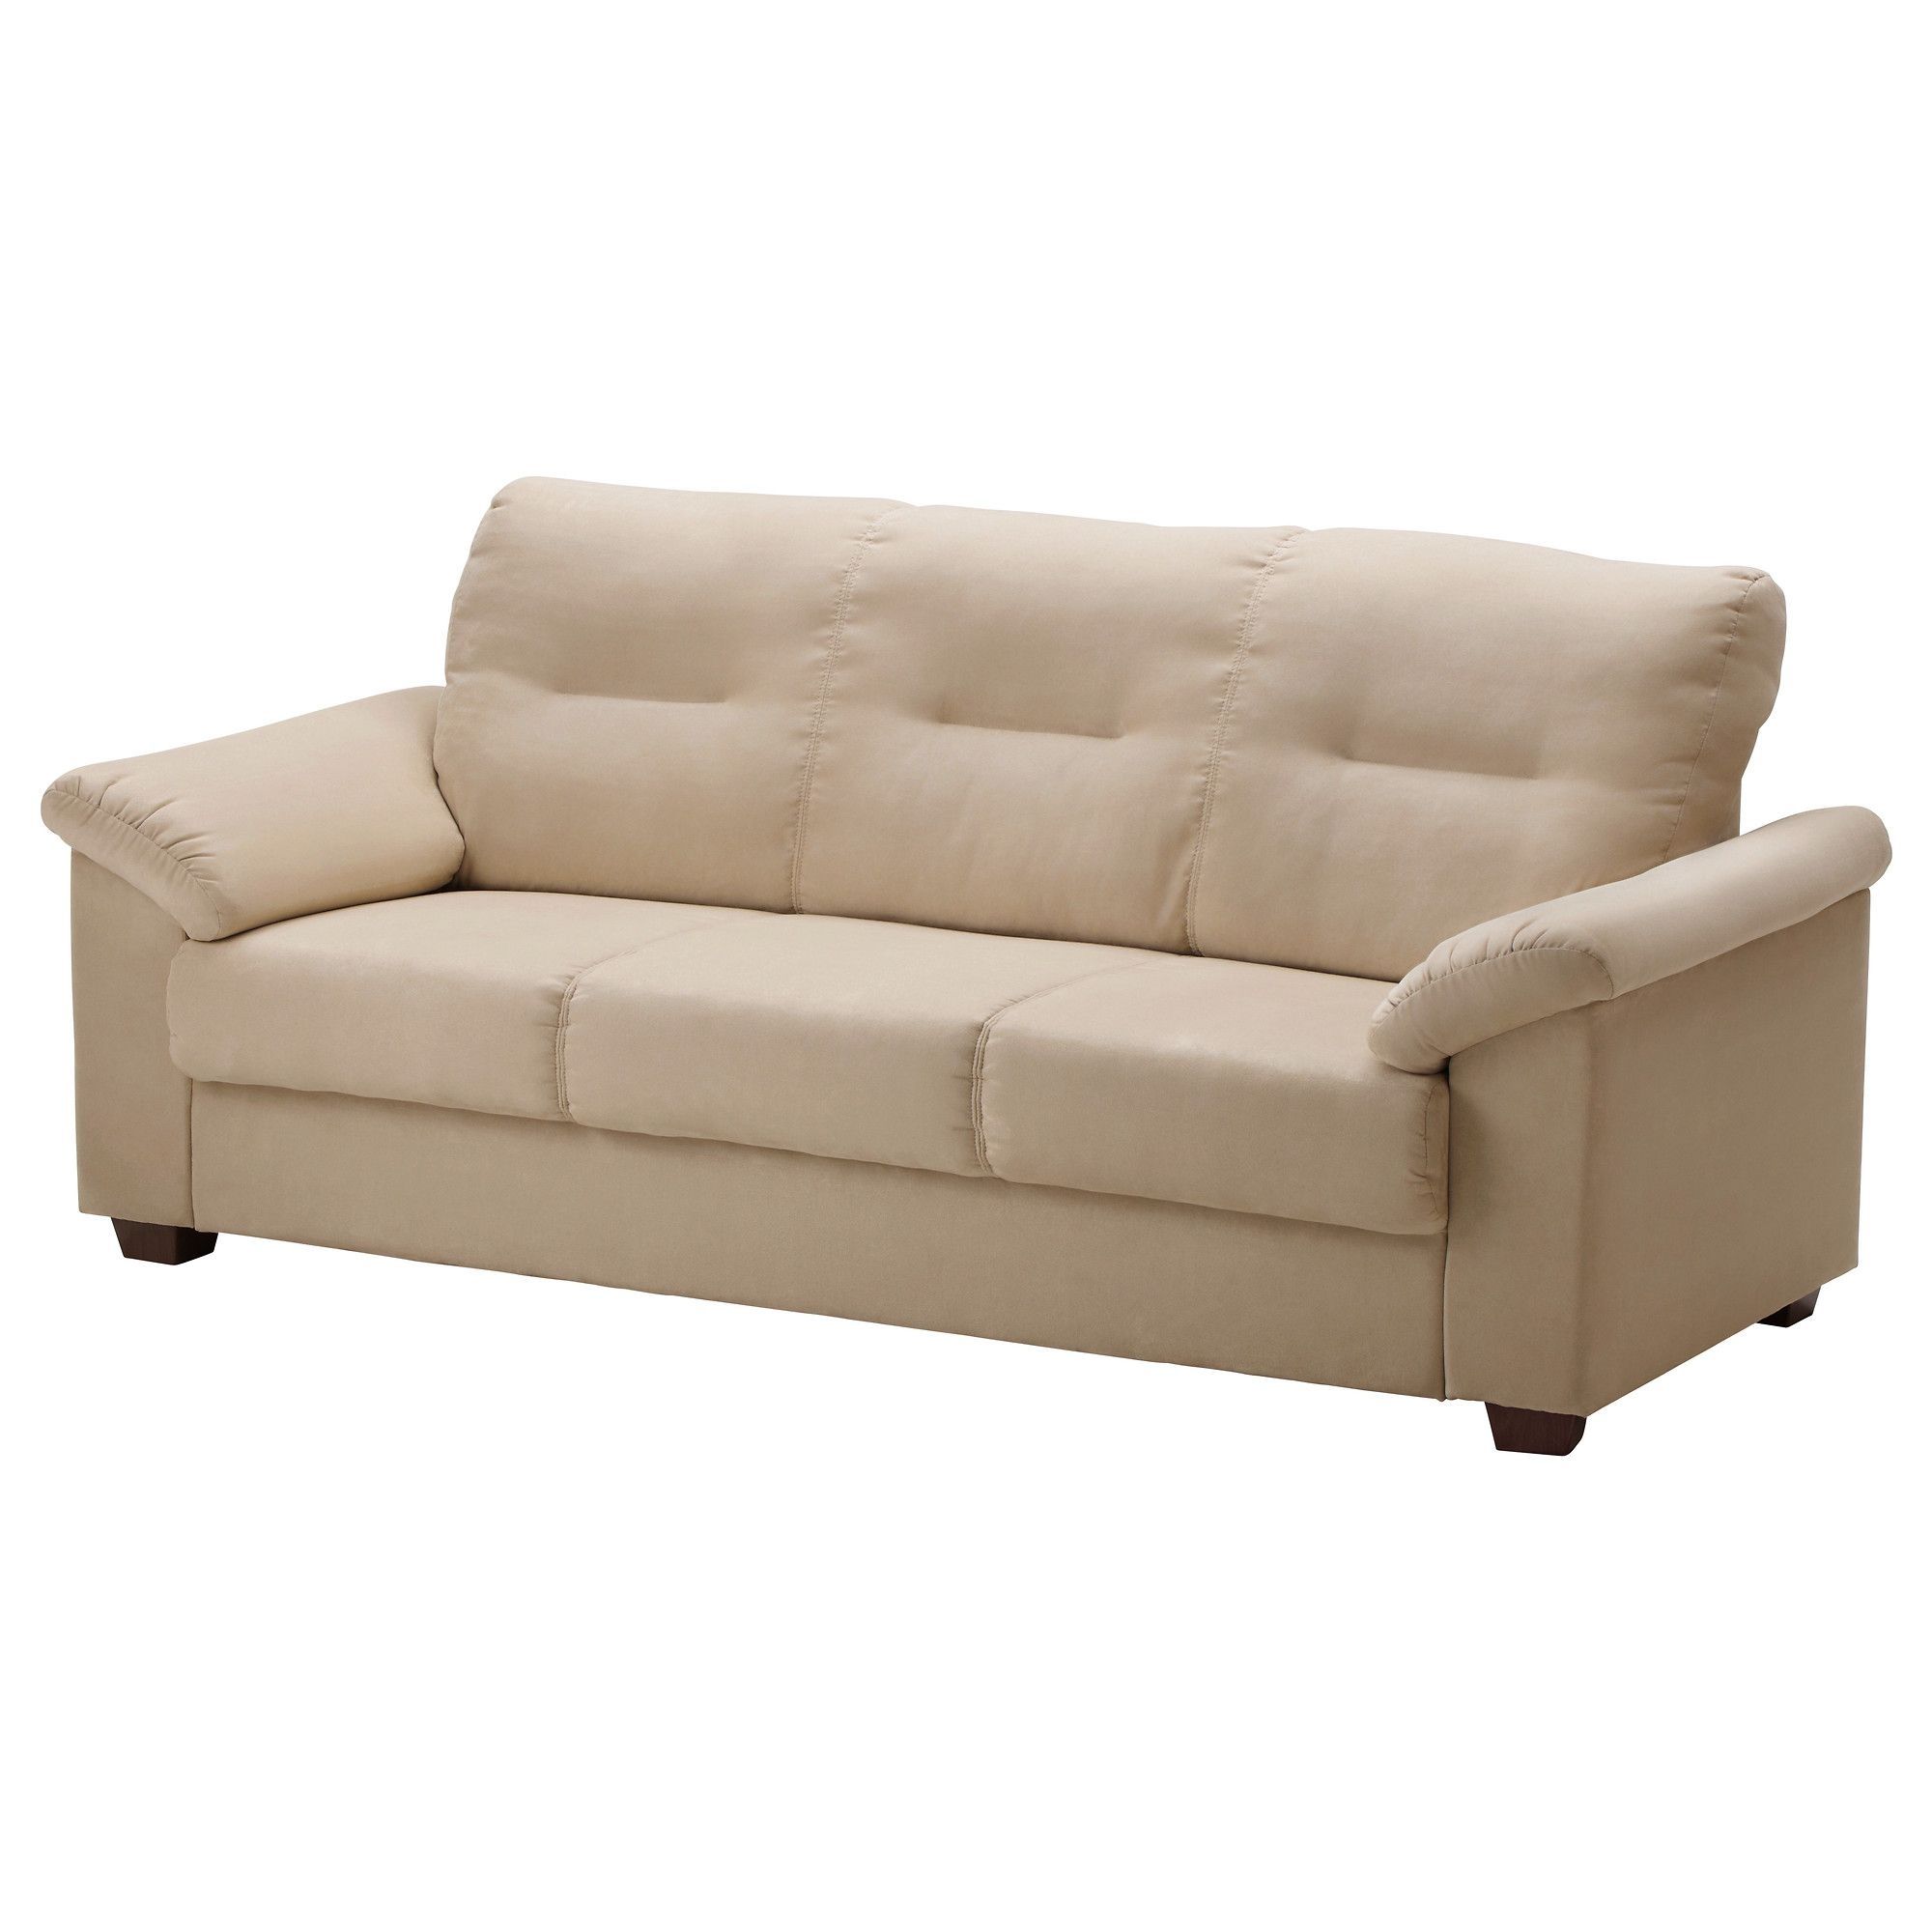 Ikea – Knislinge, Sofa, Kungsvik Sand, , The High Back Provides Good With Regard To Taron 3 Piece Power Reclining Sectionals With Left Facing Console Loveseat (Photo 2 of 30)